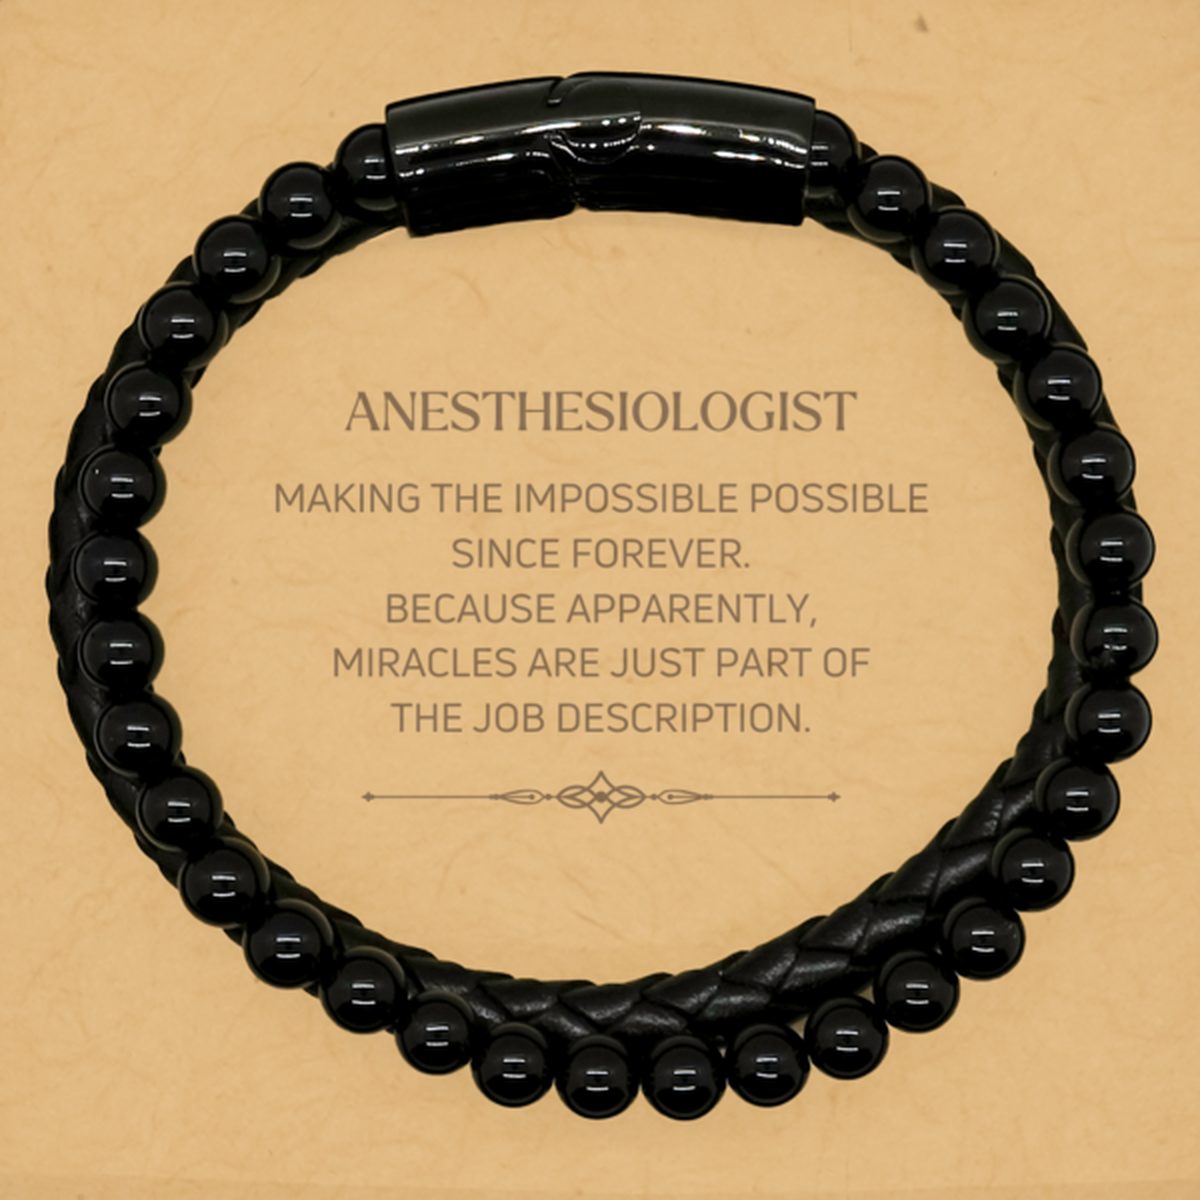 Funny Anesthesiologist Gifts, Miracles are just part of the job description, Inspirational Birthday Stone Leather Bracelets For Anesthesiologist, Men, Women, Coworkers, Friends, Boss